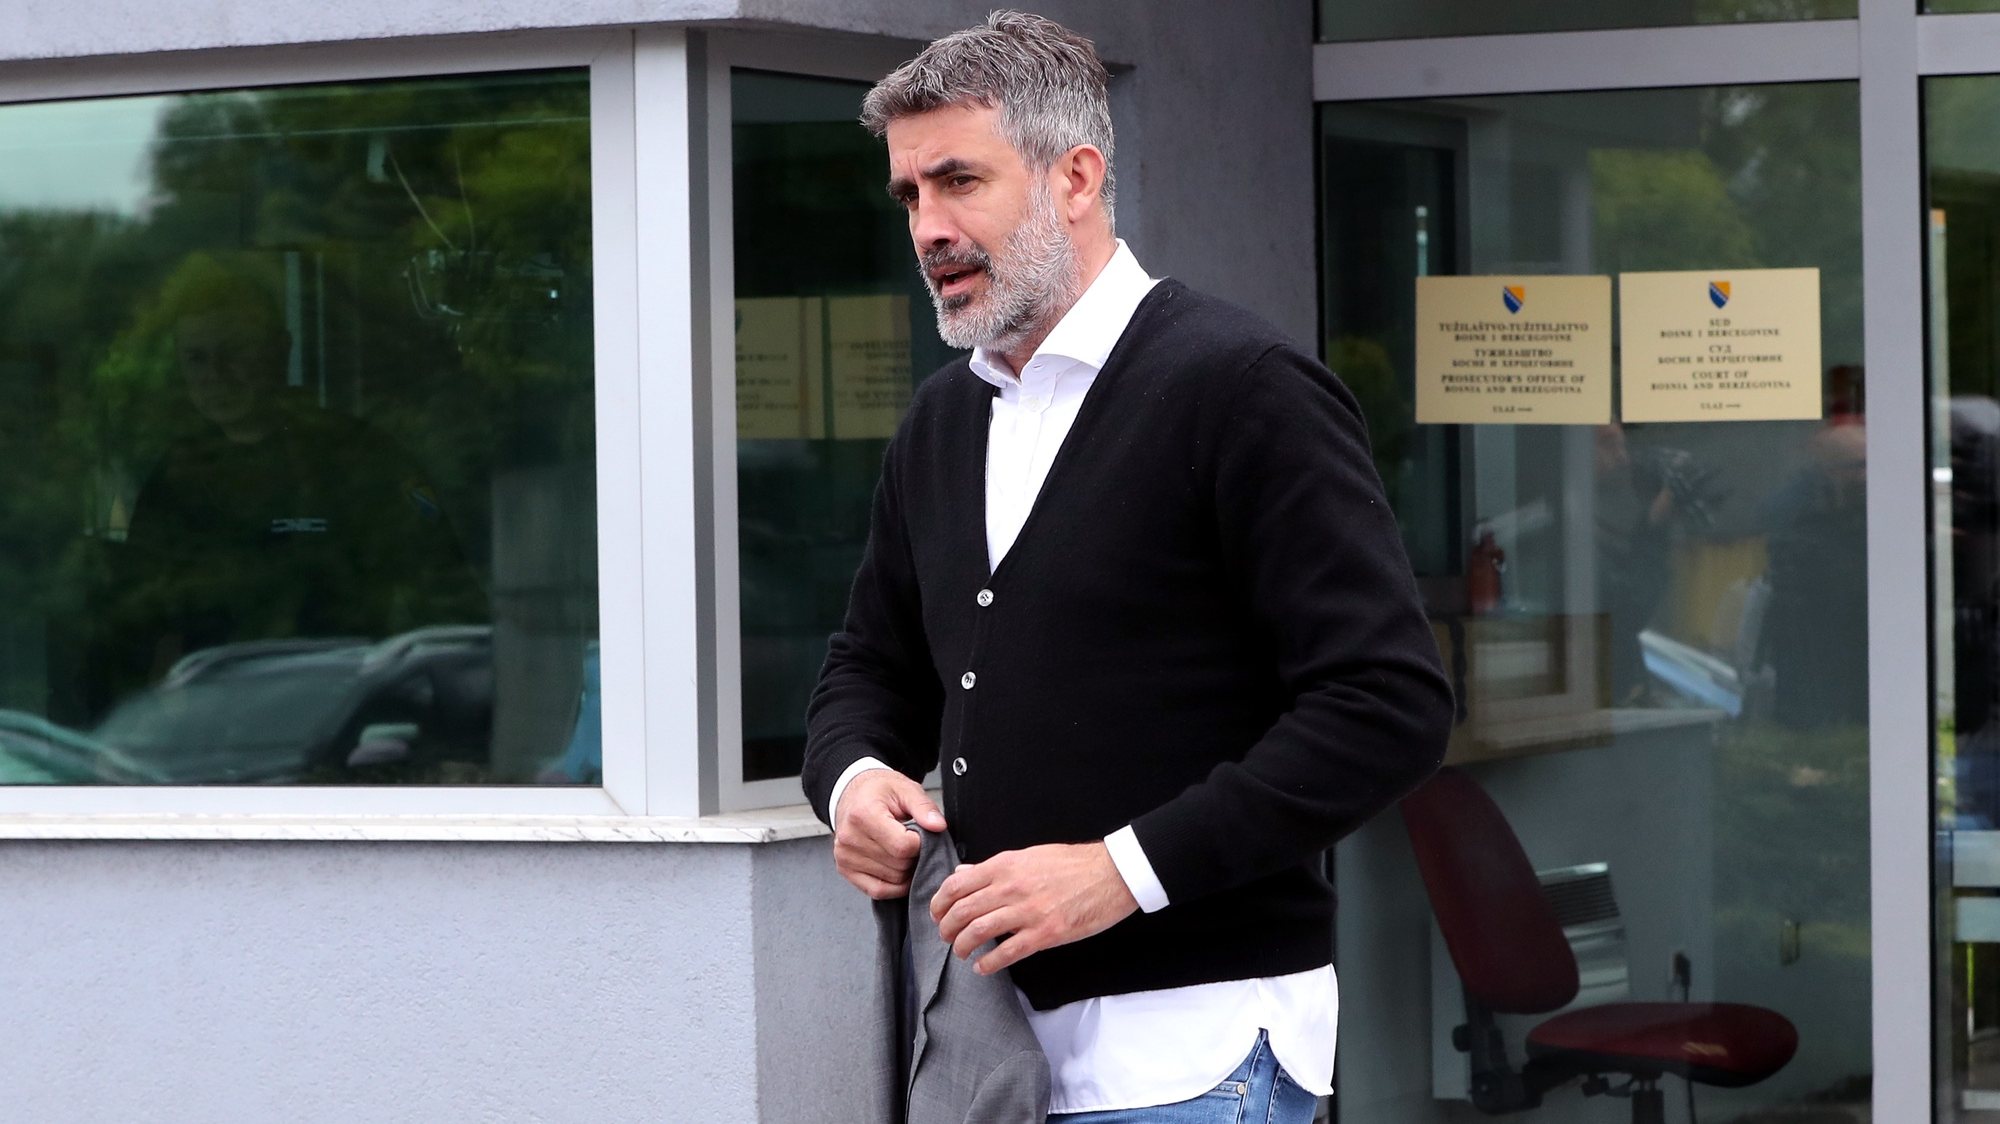 epa09211612 Zoran Mamic, the former coach of Dinamo football club from Zagreb, Croatia, arrives at the State Court of Bosnia and Herzegovina, in Sarajevo, 19 May 2021. Mamic was arrested earlr this morning in the Bosnian village of Medjugorje, some 150 kilometers from Sarajevo, on the basis of an international red warrant on request of Interpol in Zagreb, aimed at extraditing him to Croatia for the execution of a court judgment. Zoran Mamic was sentenced to 4 years and 8 months in prison in Croatia for withdrawing money from the Dinamo Zagreb soccer club.  EPA/FEHIM DEMIR